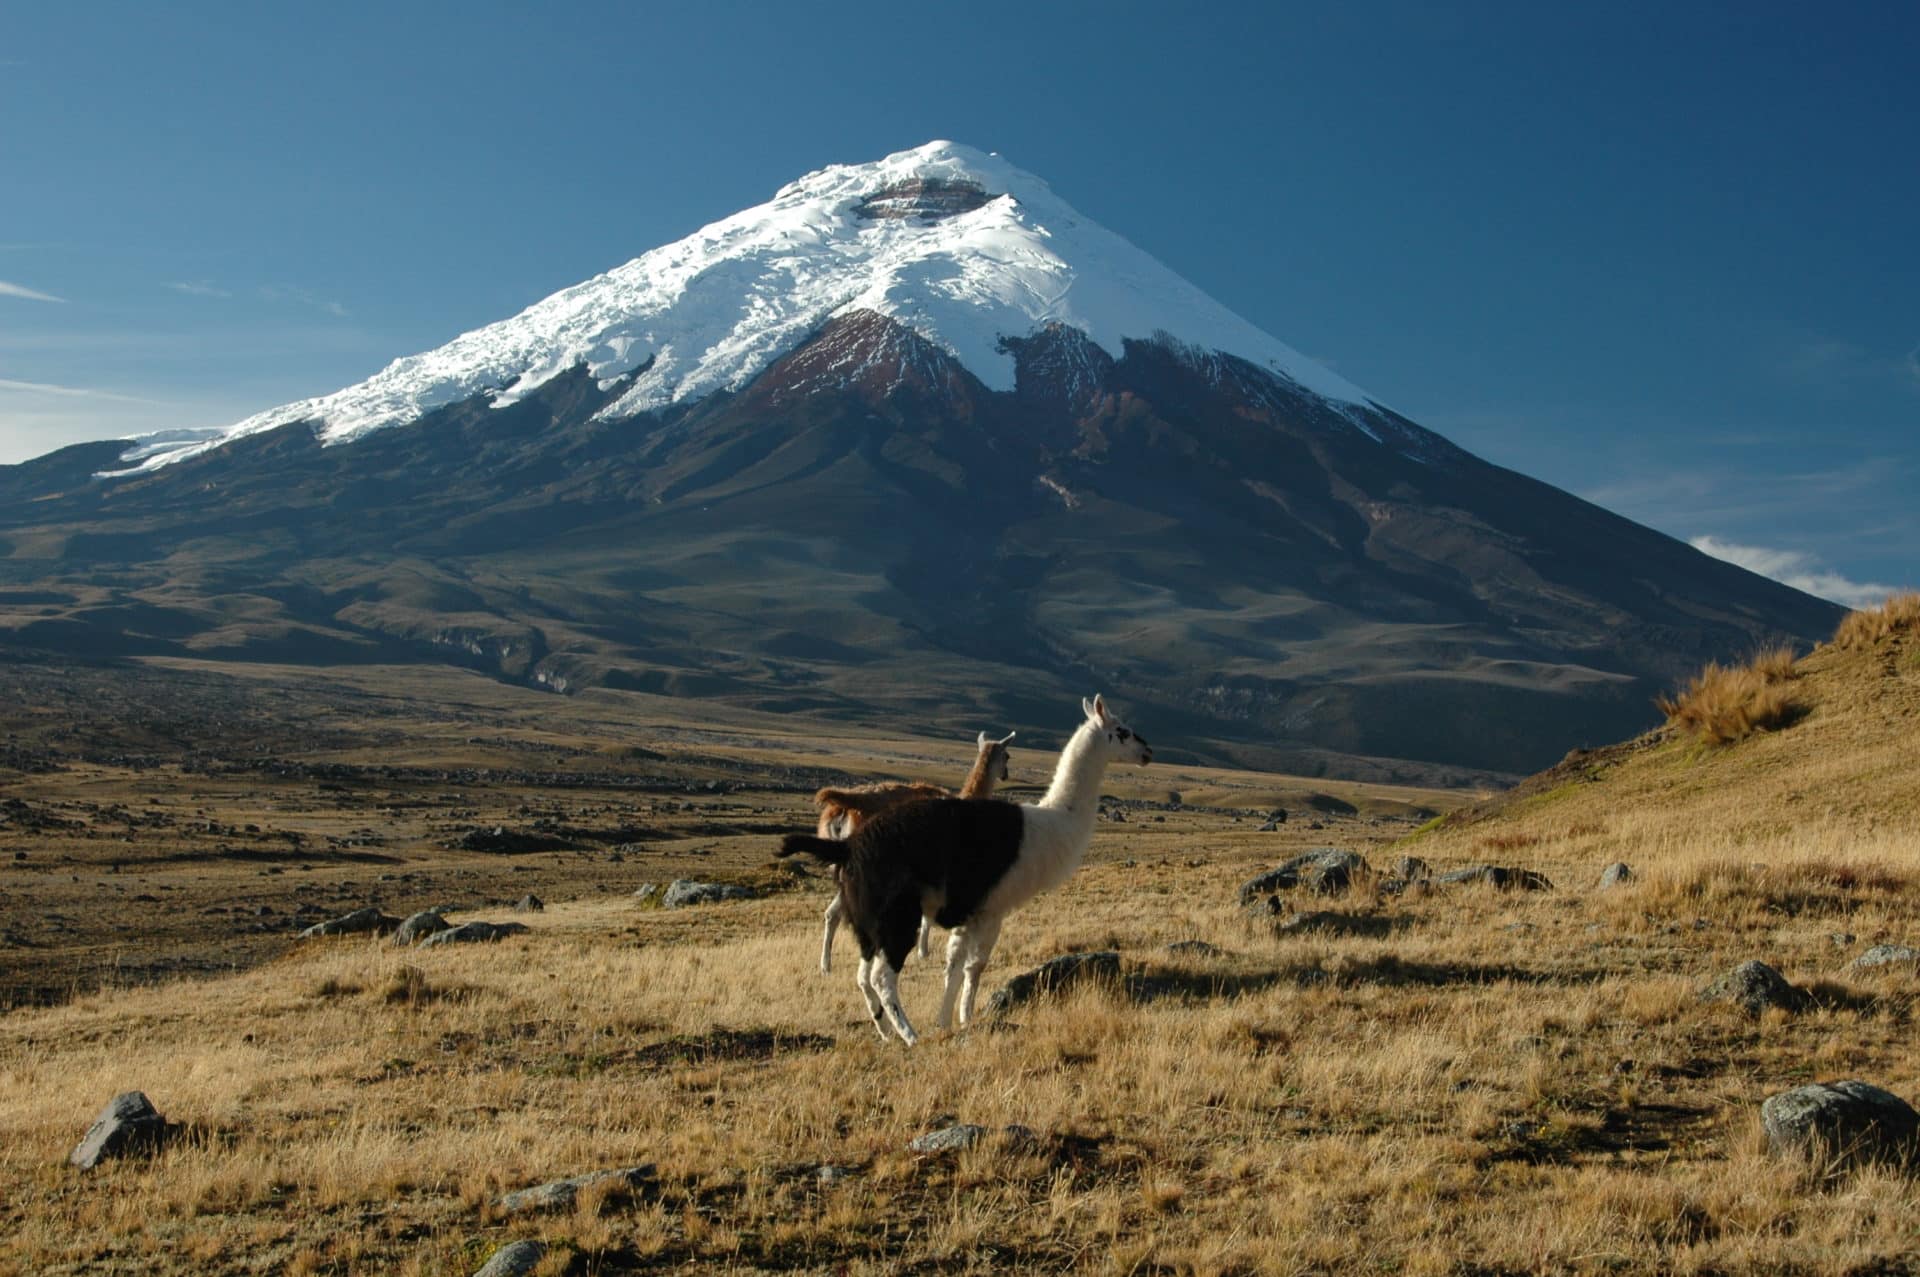 Two Day Mountaineering Tour To Cotopaxi Volcano. 2 Day Trip